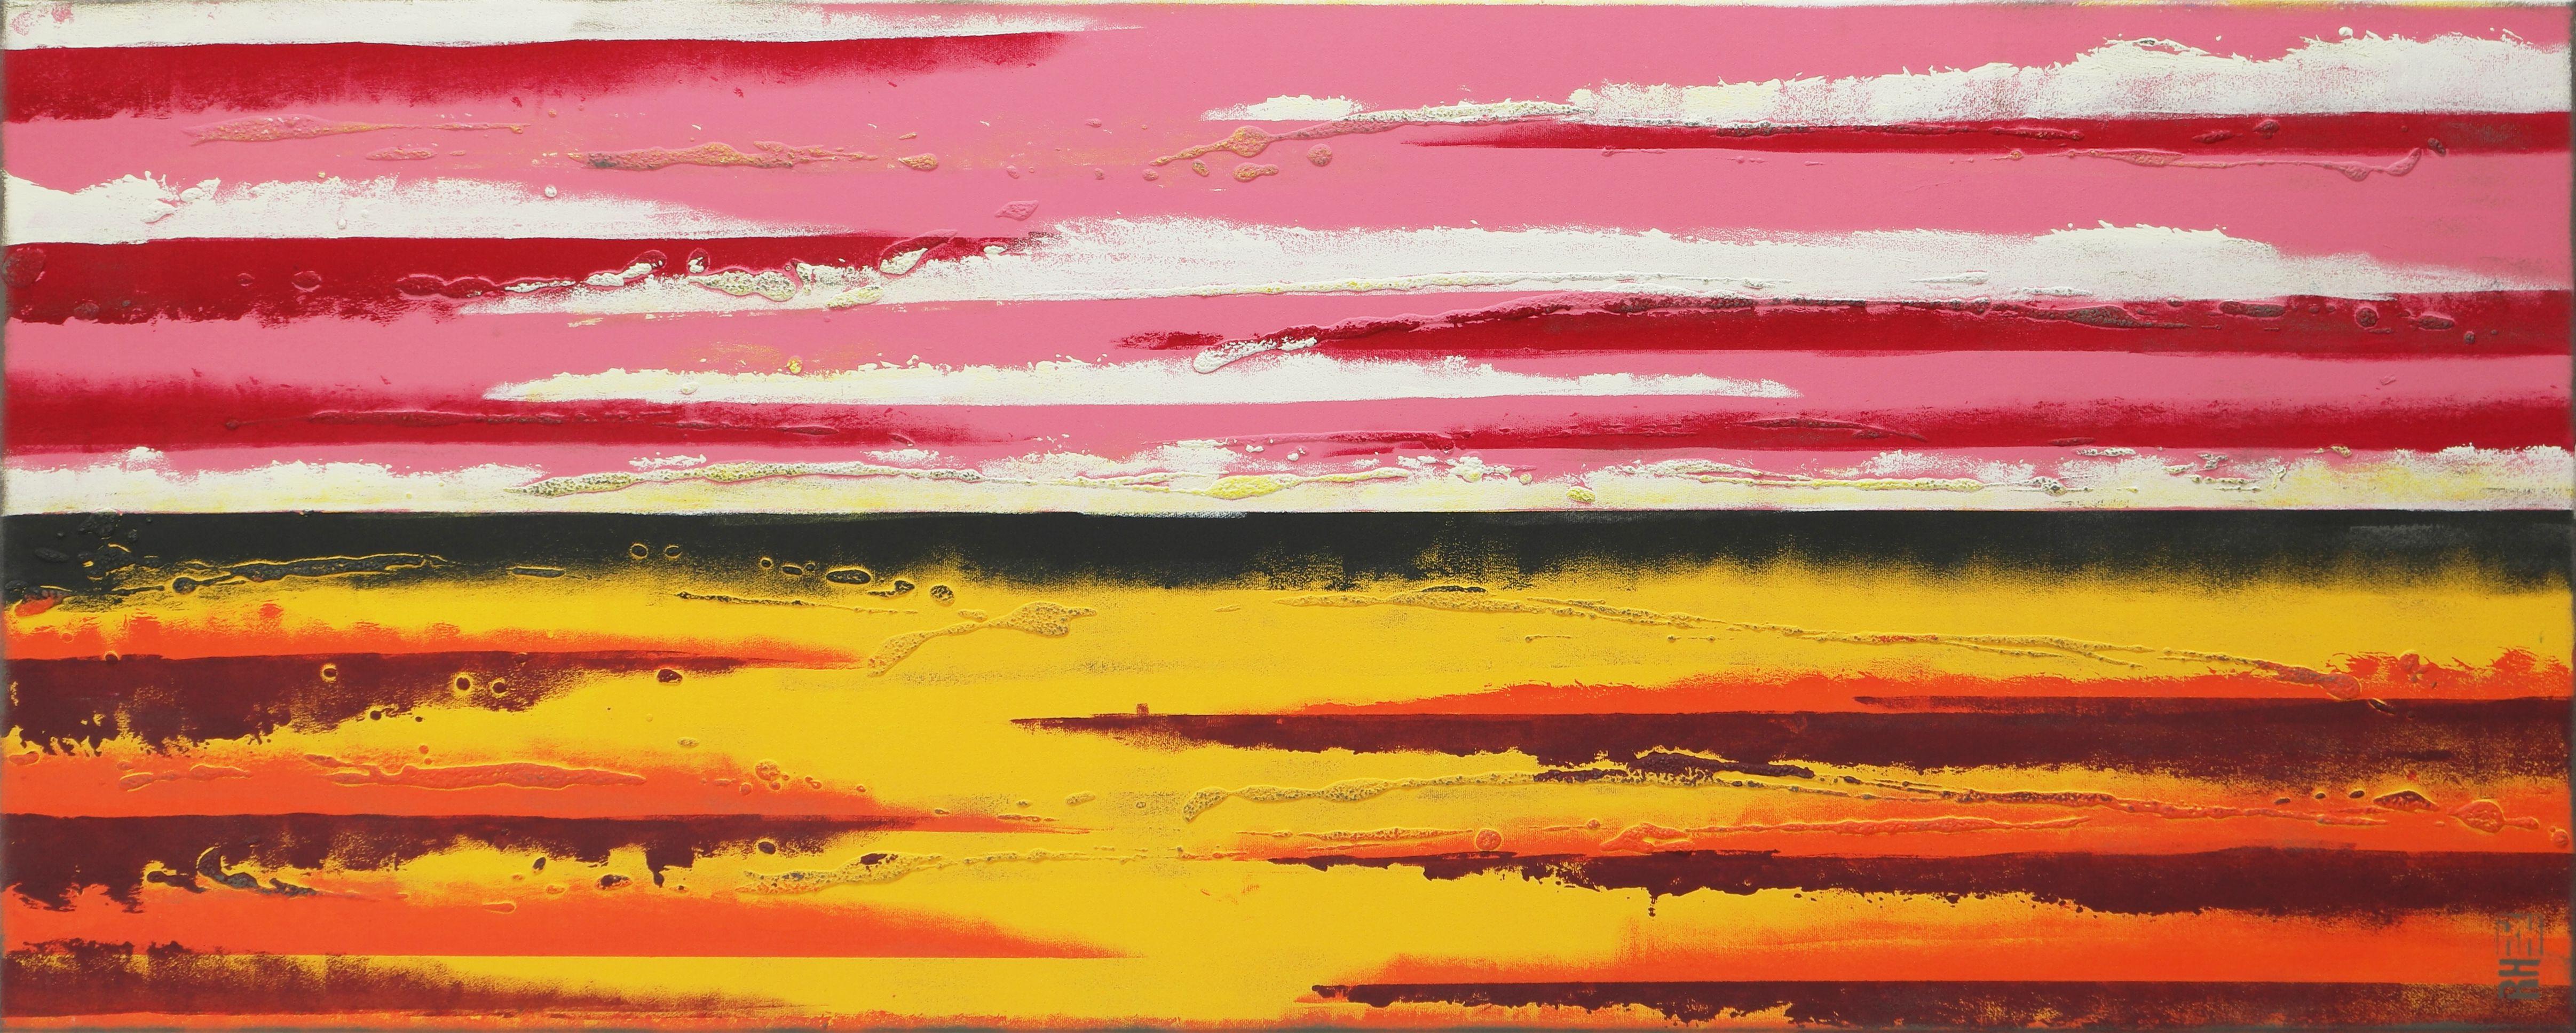 Ronald Hunter Abstract Painting - Warm Red Landscape, Painting, Acrylic on Canvas